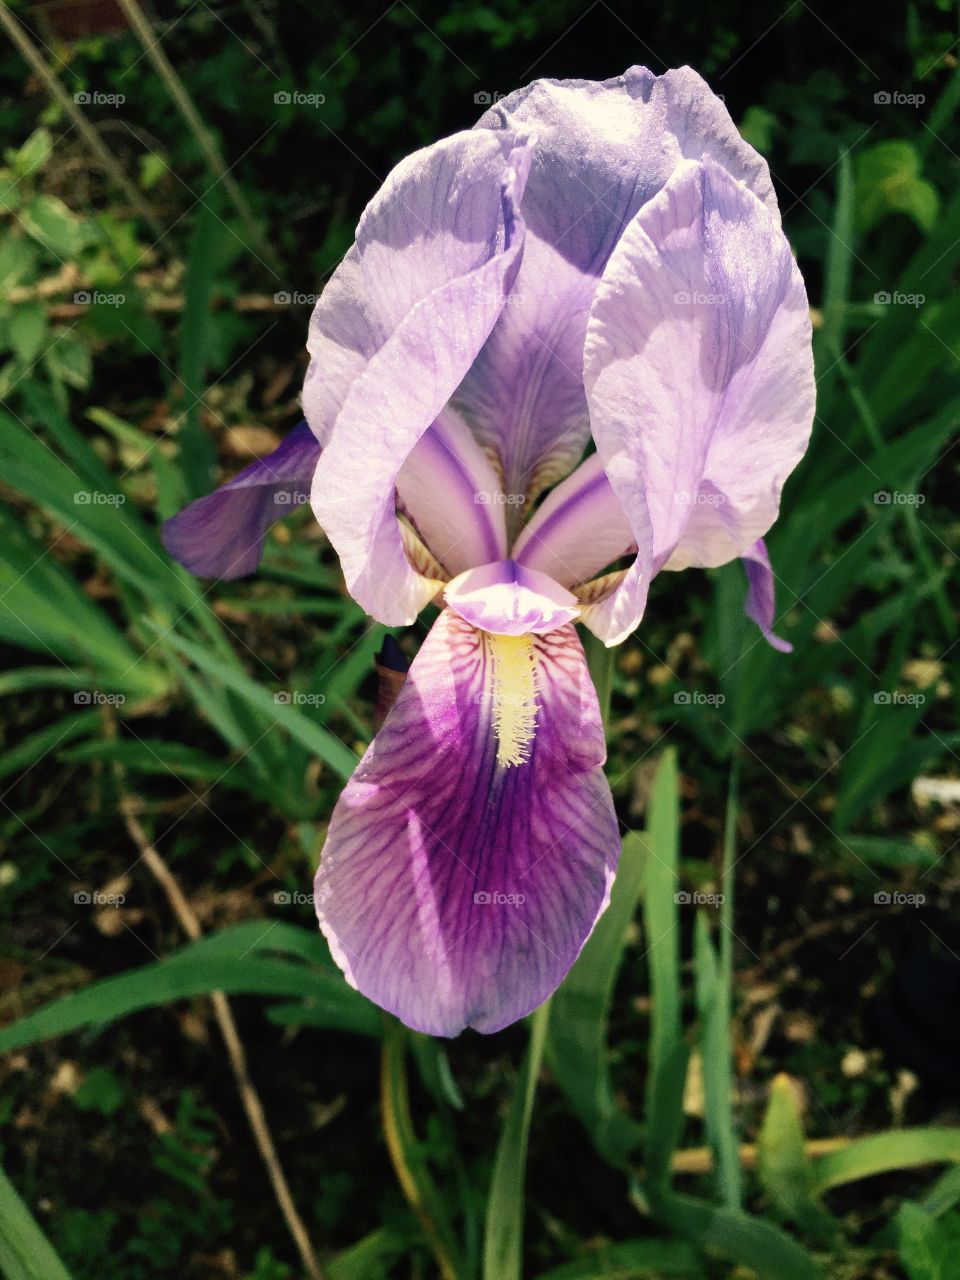 Beautiful two toned purple and lavender Iris flower in the garden.